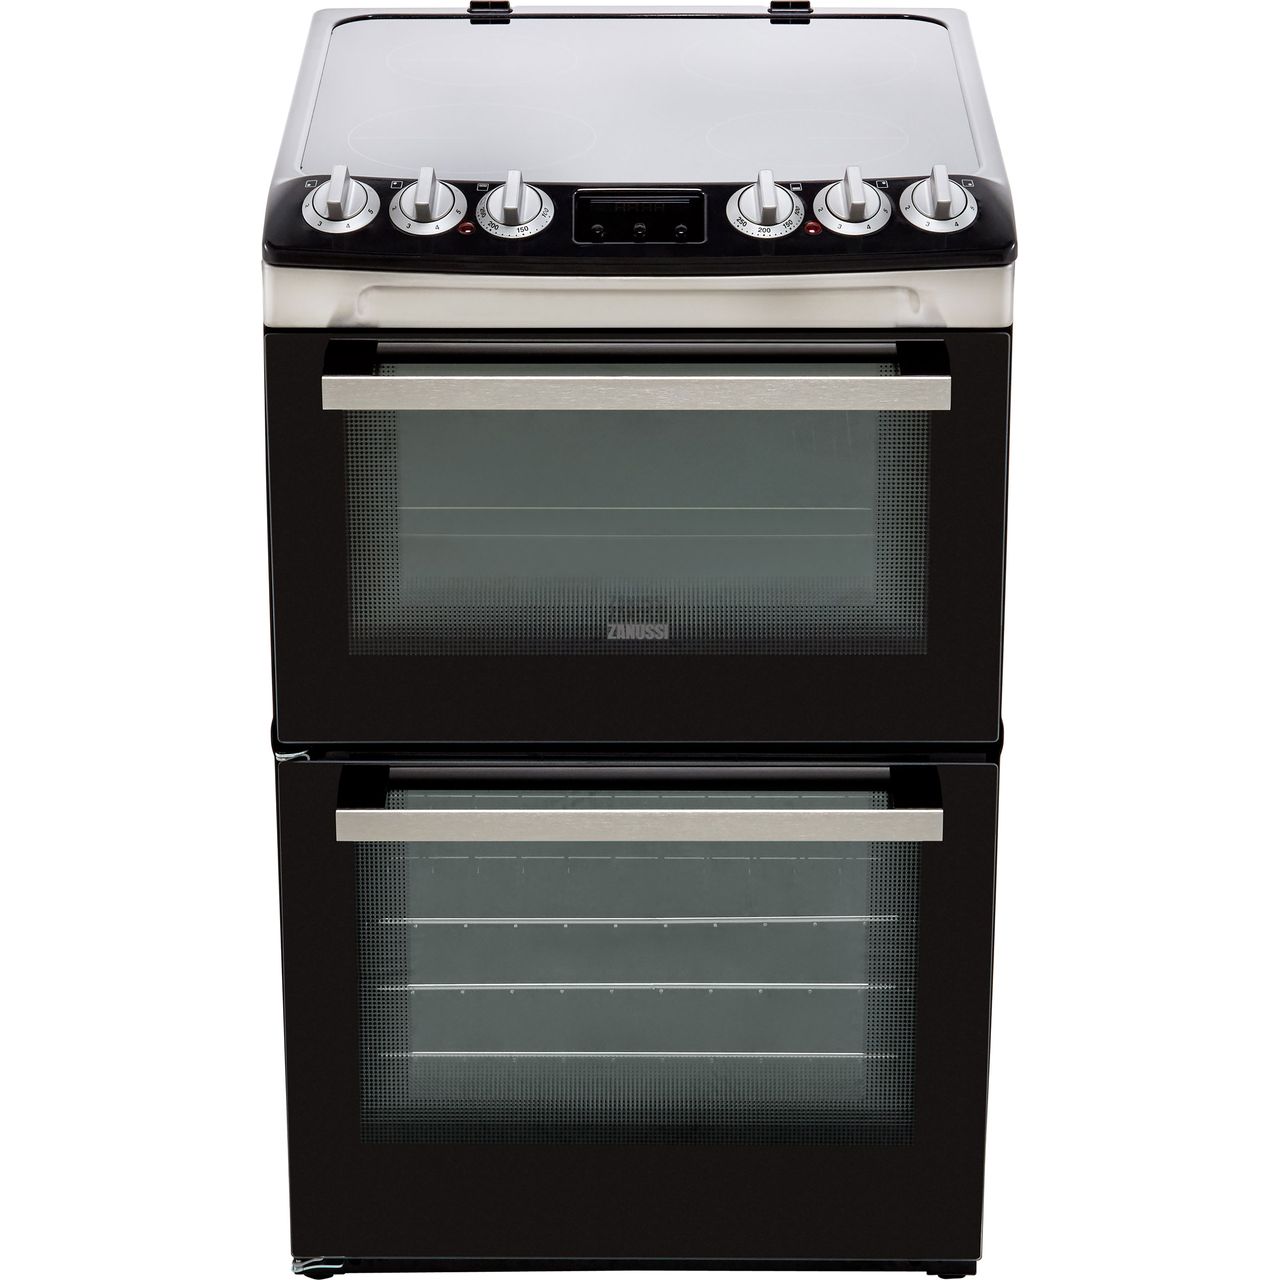 55cm electric cooker with induction hob